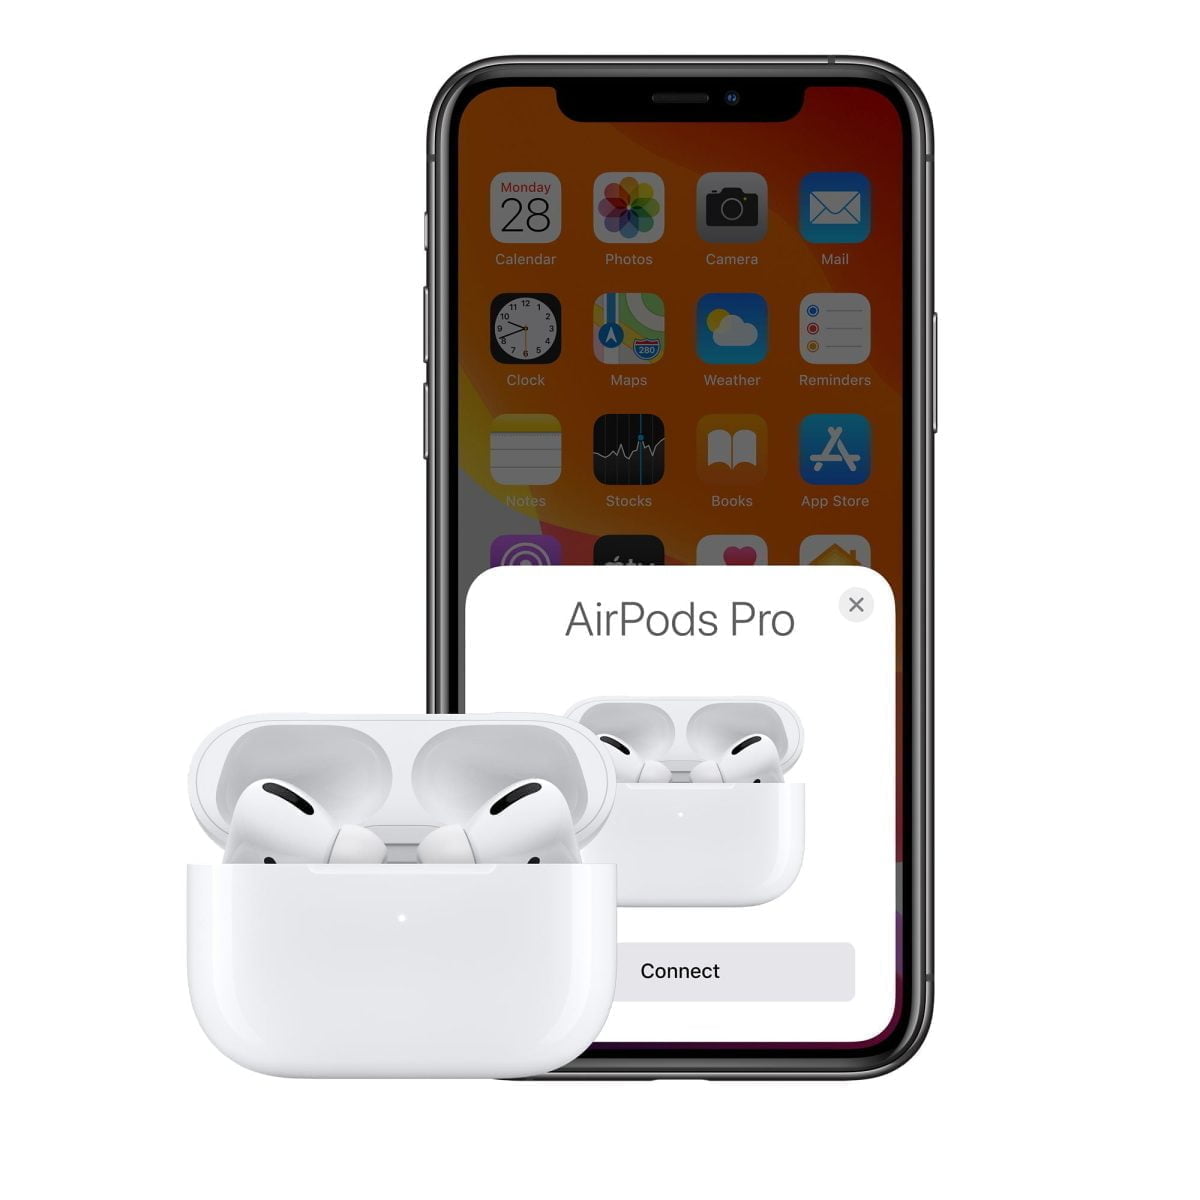 Mwp22 Av5 Geo Ae Apple &Lt;Div Class=&Quot;Rc-Pdsection-Sidepanel Column Large-3 Small-12&Quot;&Gt; &Lt;H1&Gt;Apple Airpods Pro (With Magsafe Charging Case) - White&Lt;/H1&Gt; &Lt;/Div&Gt; &Lt;Div Class=&Quot;Rc-Pdsection-Mainpanel Column Large-9 Small-12&Quot;&Gt; &Lt;H4 Class=&Quot;H4-Para-Title&Quot;&Gt;Magic Like You’ve Never Heard&Lt;/H4&Gt; &Lt;Div Class=&Quot;Para-List As-Pdp-Lastparalist&Quot;&Gt; Airpods Pro Have Been Designed To Deliver Active Noise Cancellation For Immersive Sound, Transparency Mode So You Can Hear Your Surroundings, And A Customizable Fit For All-Day Comfort. Just Like Airpods, Airpods Pro Connect Magically To Your Apple Devices. And They’re Ready To Use Right Out Of The Case. &Lt;/Div&Gt; &Lt;/Div&Gt; Airpods Pro Apple Airpods Pro (With Magsafe Charging Case) - White Mlwk3